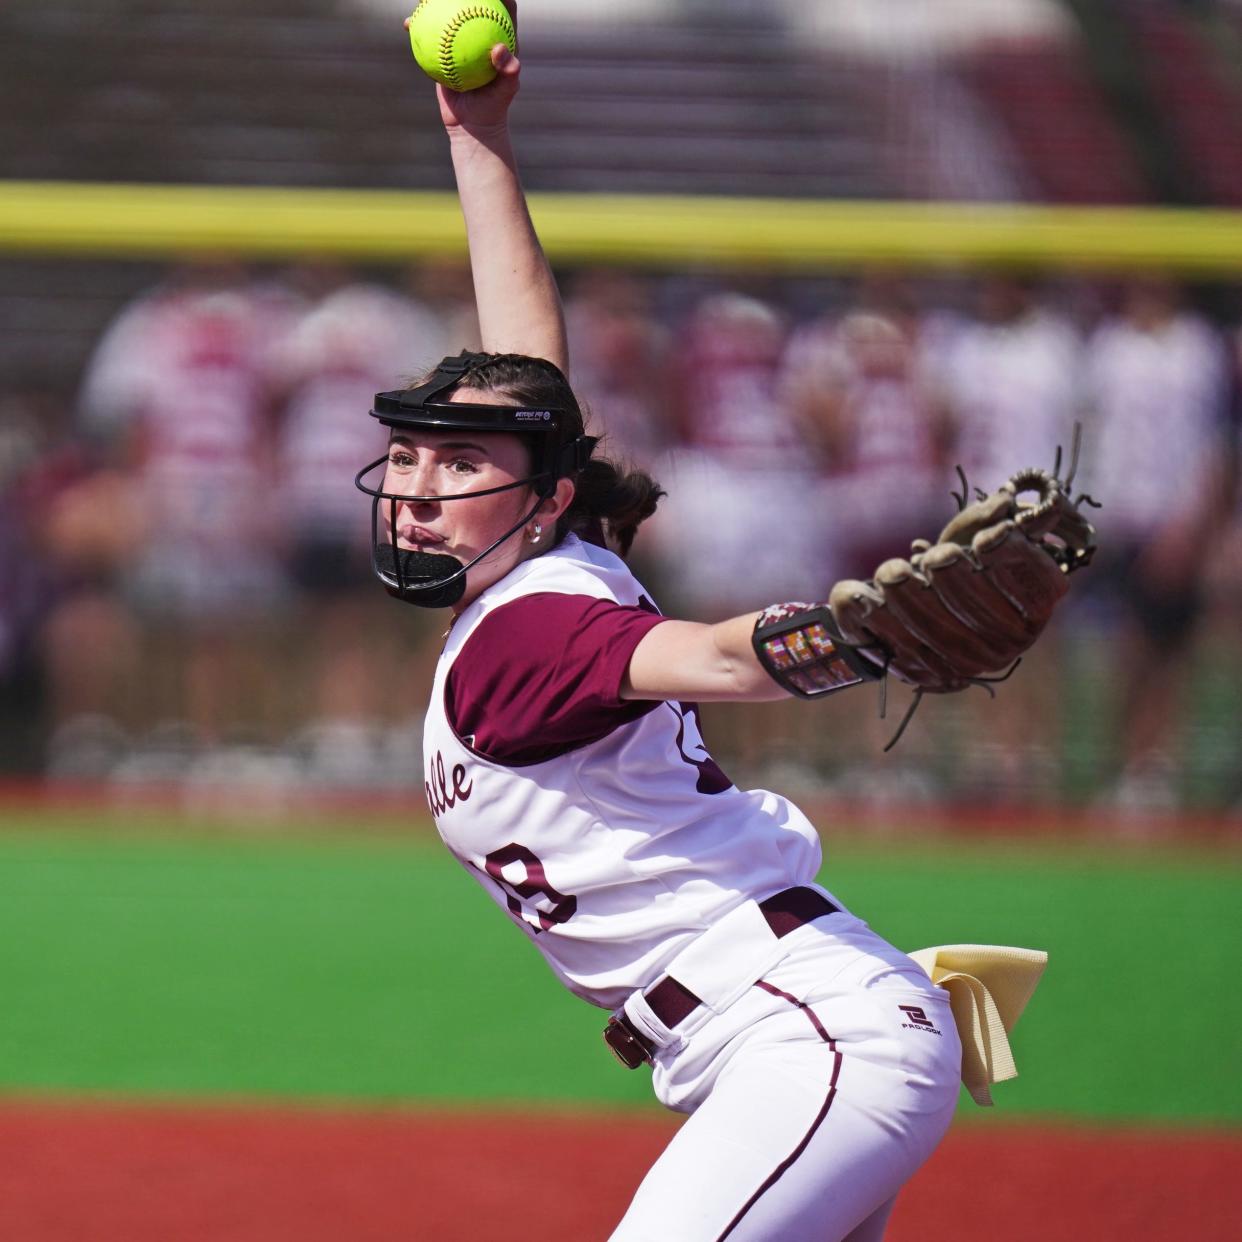 Hailey Vigneau pitched herself out of tough spots in the first and seventh innings and was dominant in between, helping La Salle stay undefeated with a win over Prout in Sunday's battle of the unbeatens.